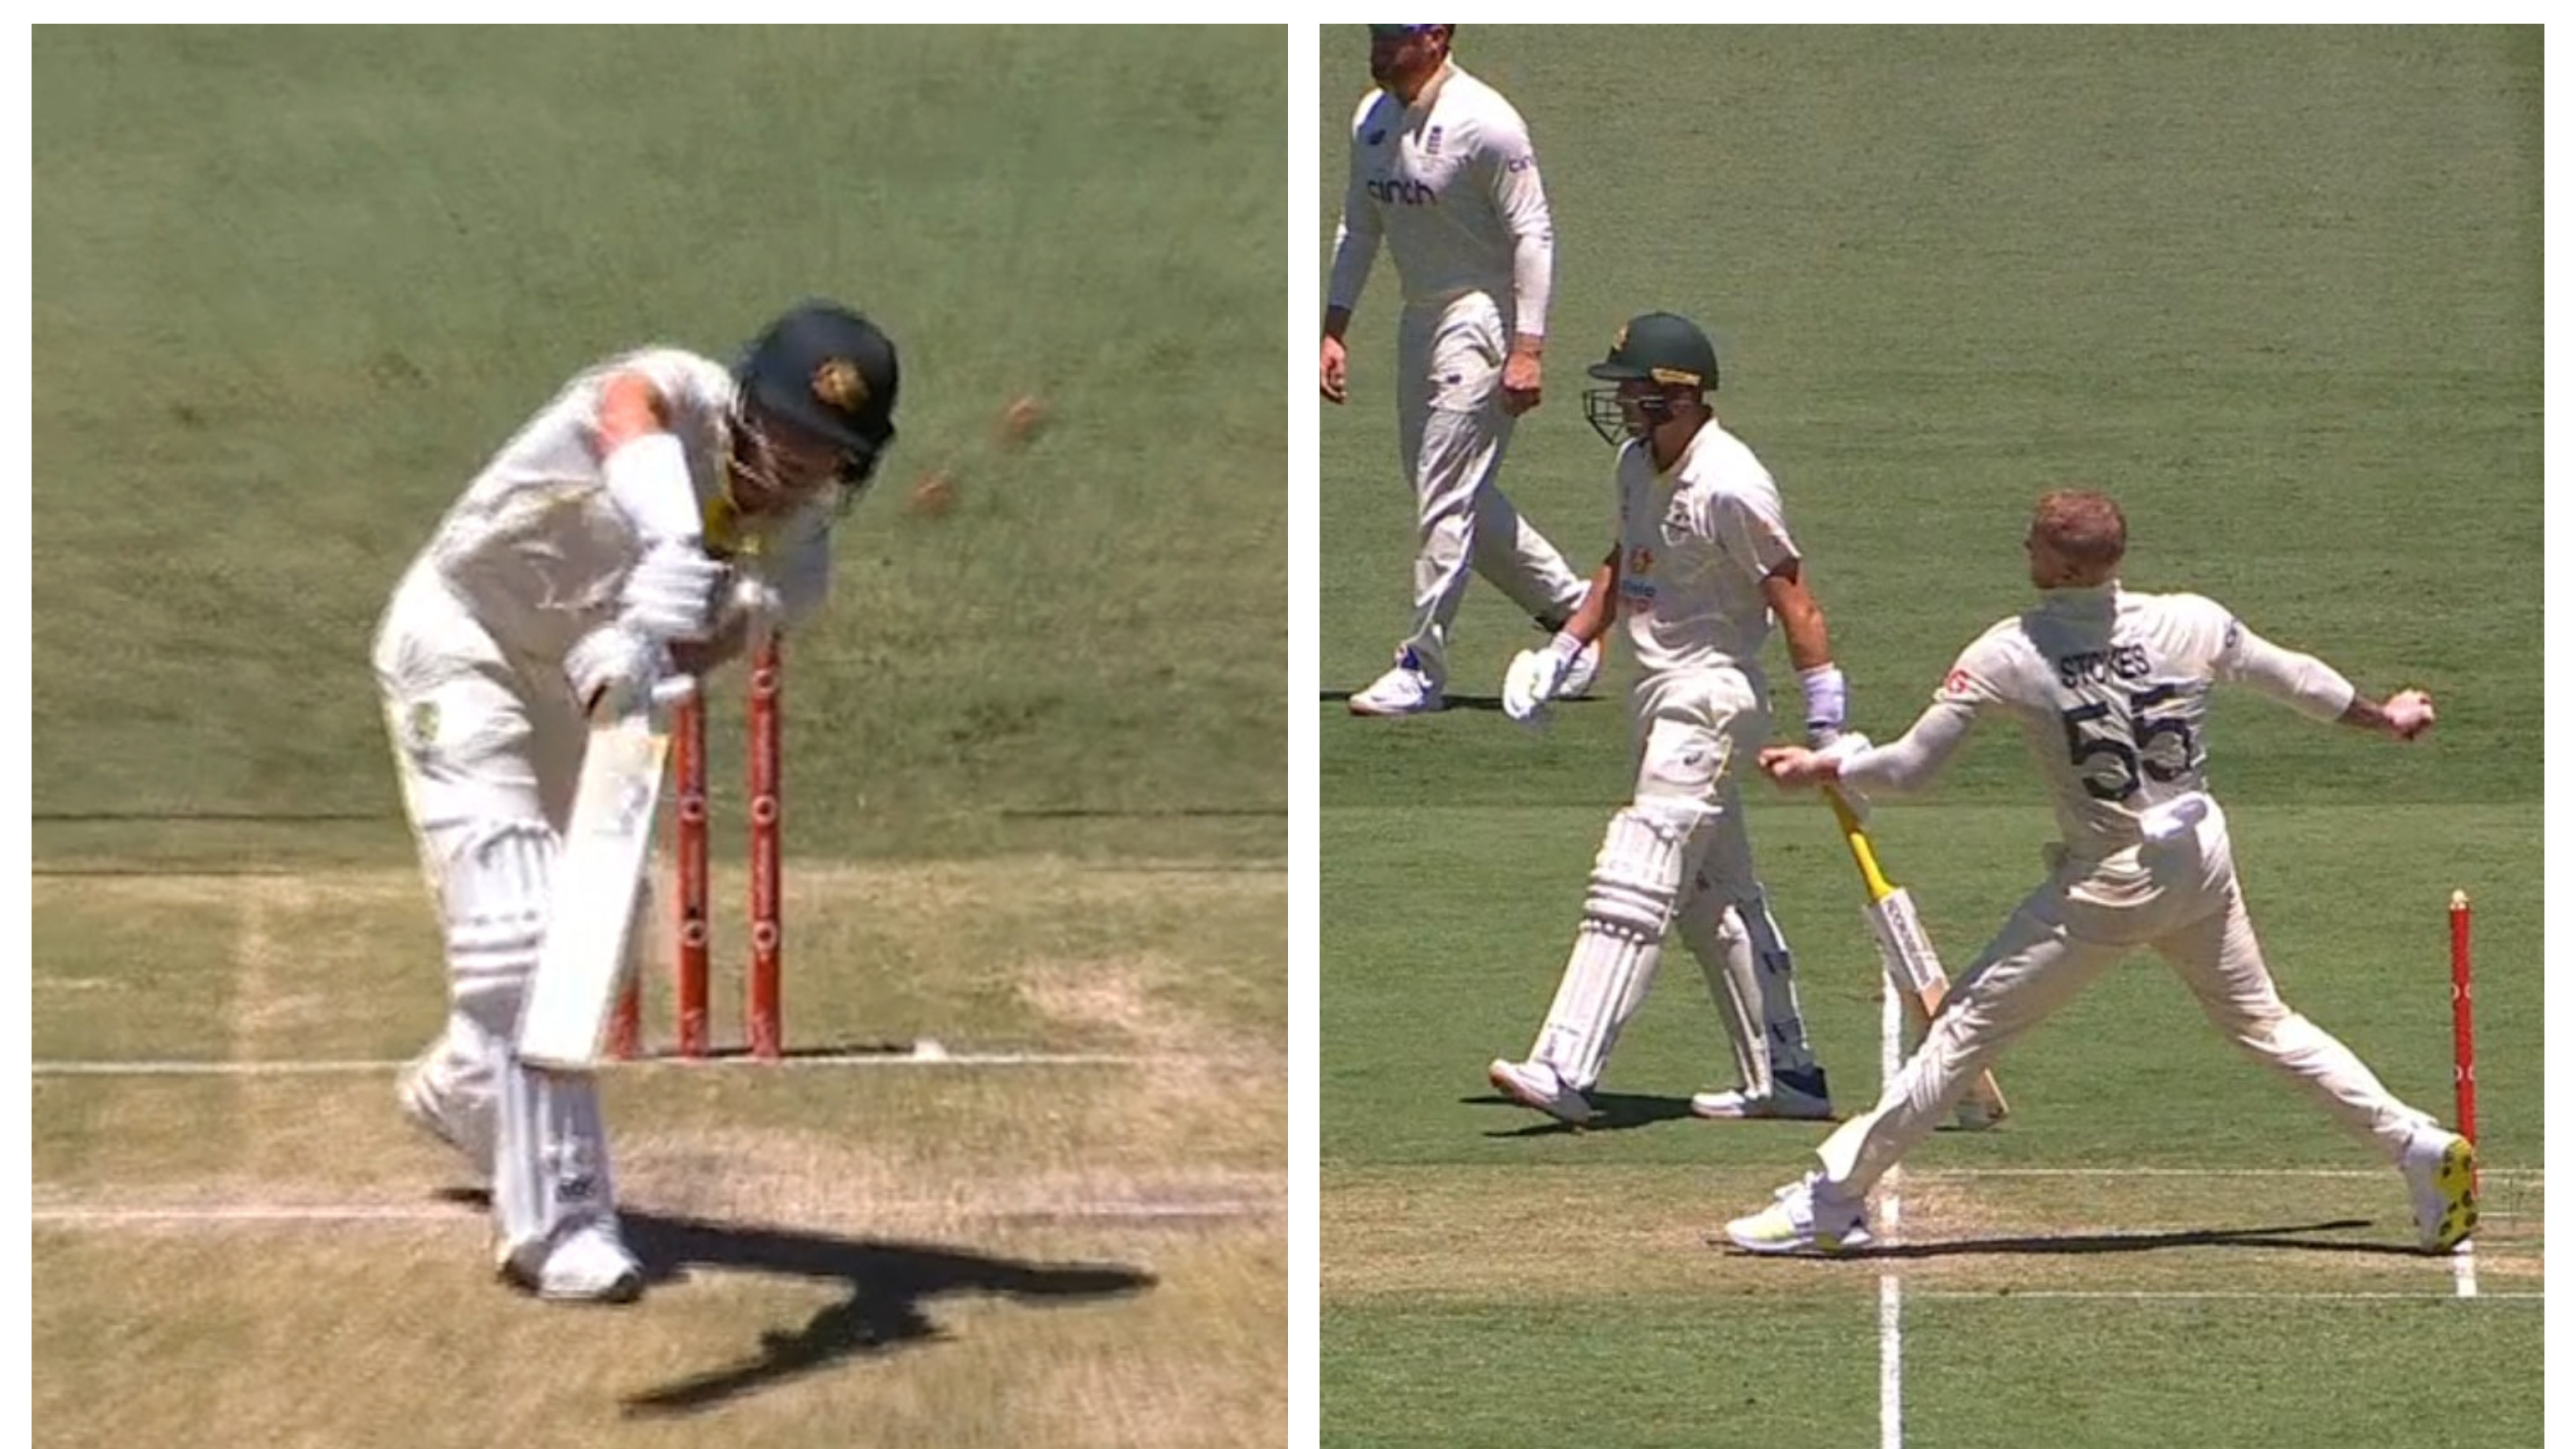 Ashes 2021-22: TV umpire fails to check Ben Stokes’ no-ball on 13 occasions as technology breaks down at Gabba